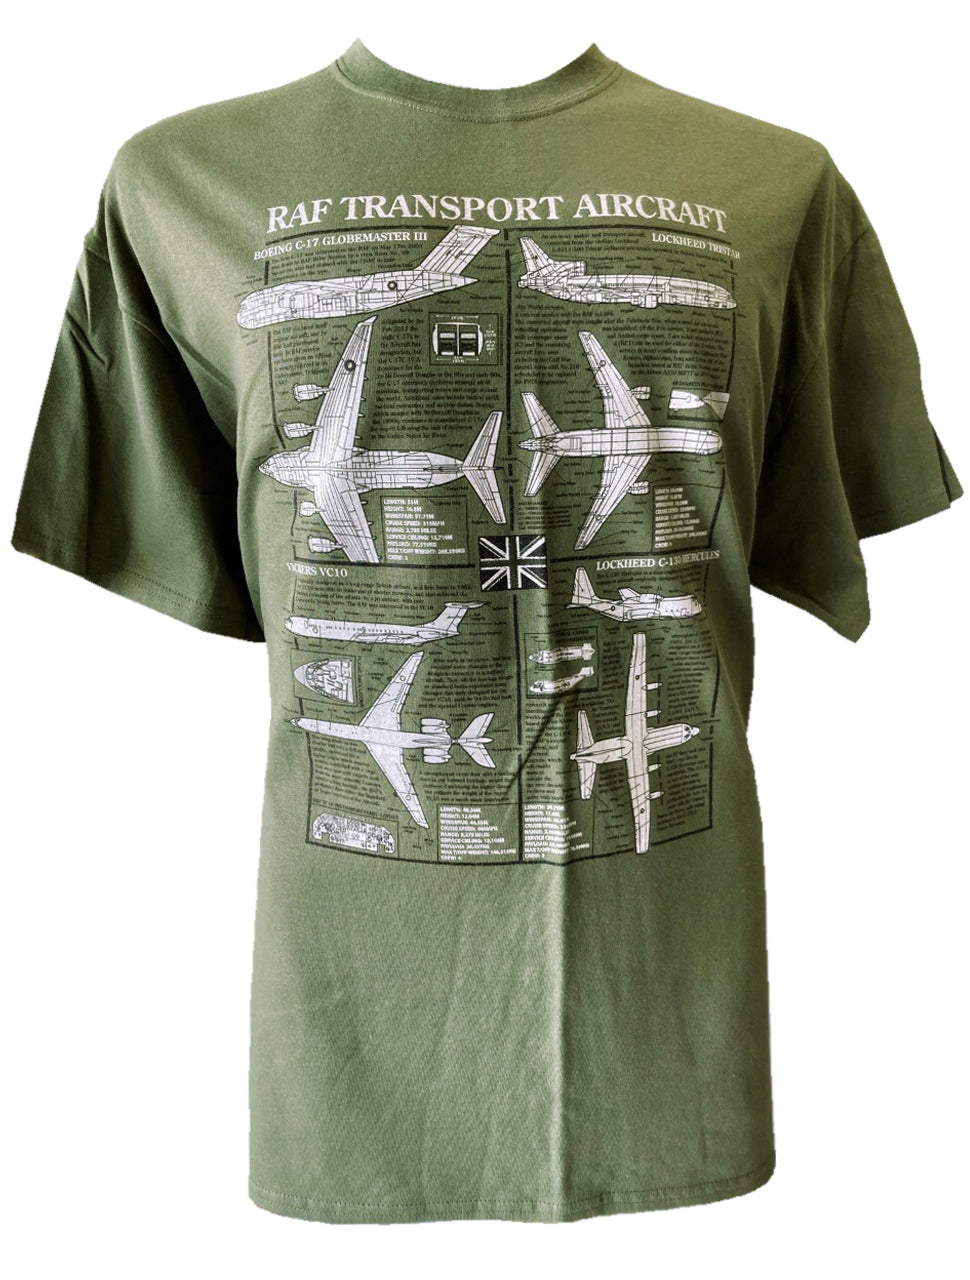 US & RAF Military Transport Aircraft (Blueprint Design) T-shirt LIMITED AVAILABILITY - WHEN IT'S GONE IT'S GONE!